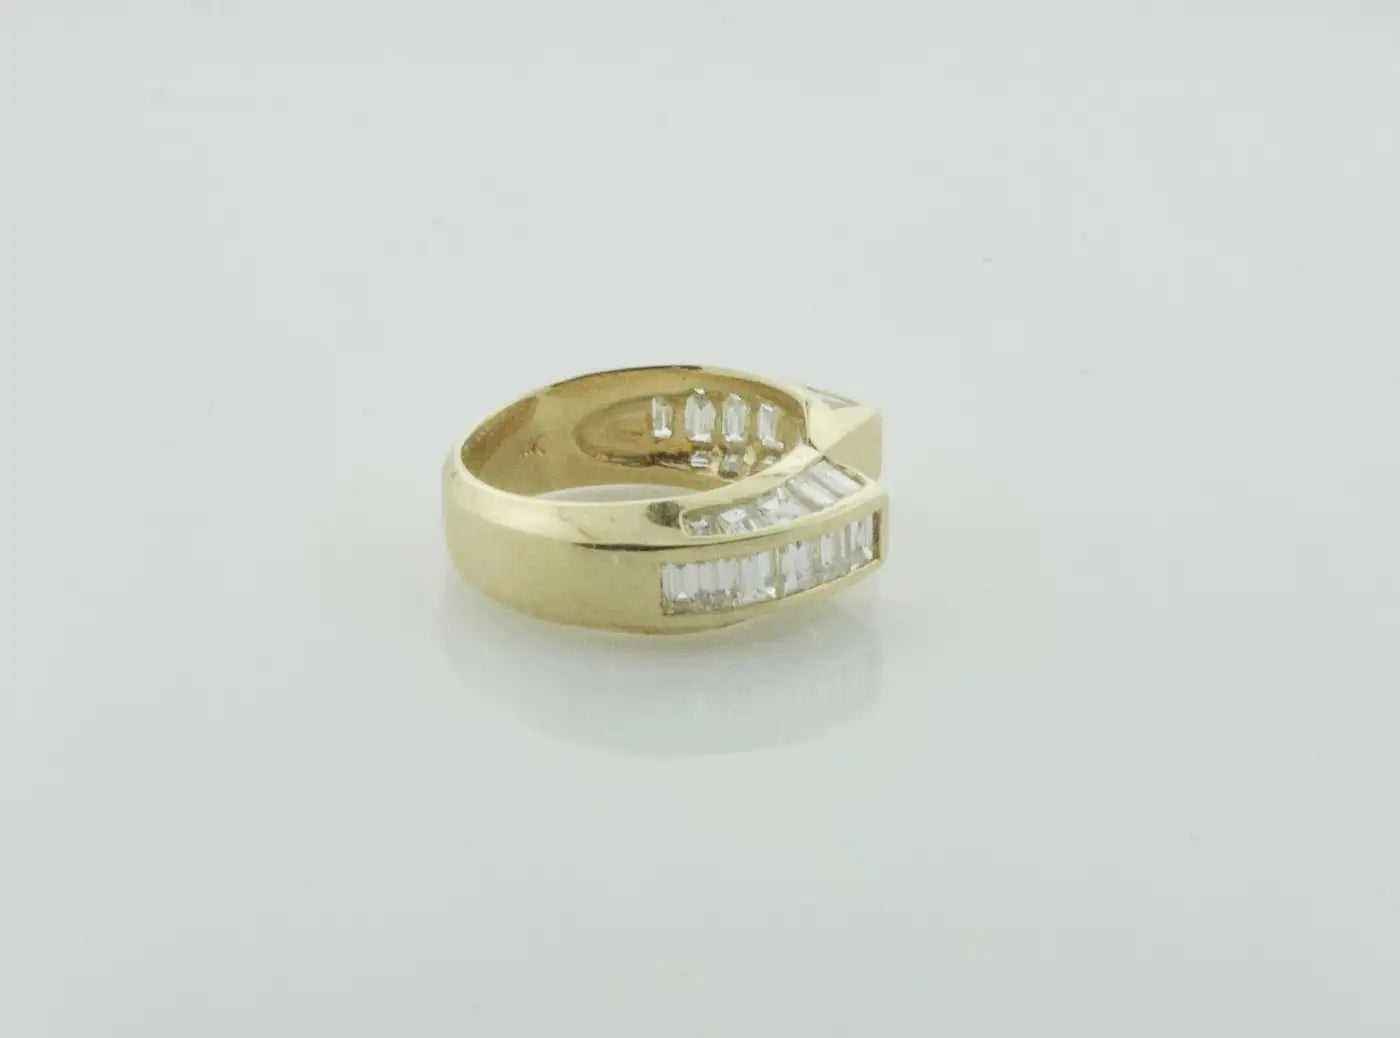 Delightful Petite Diamond Ring in Yellow Gold 1.15 Carats Total